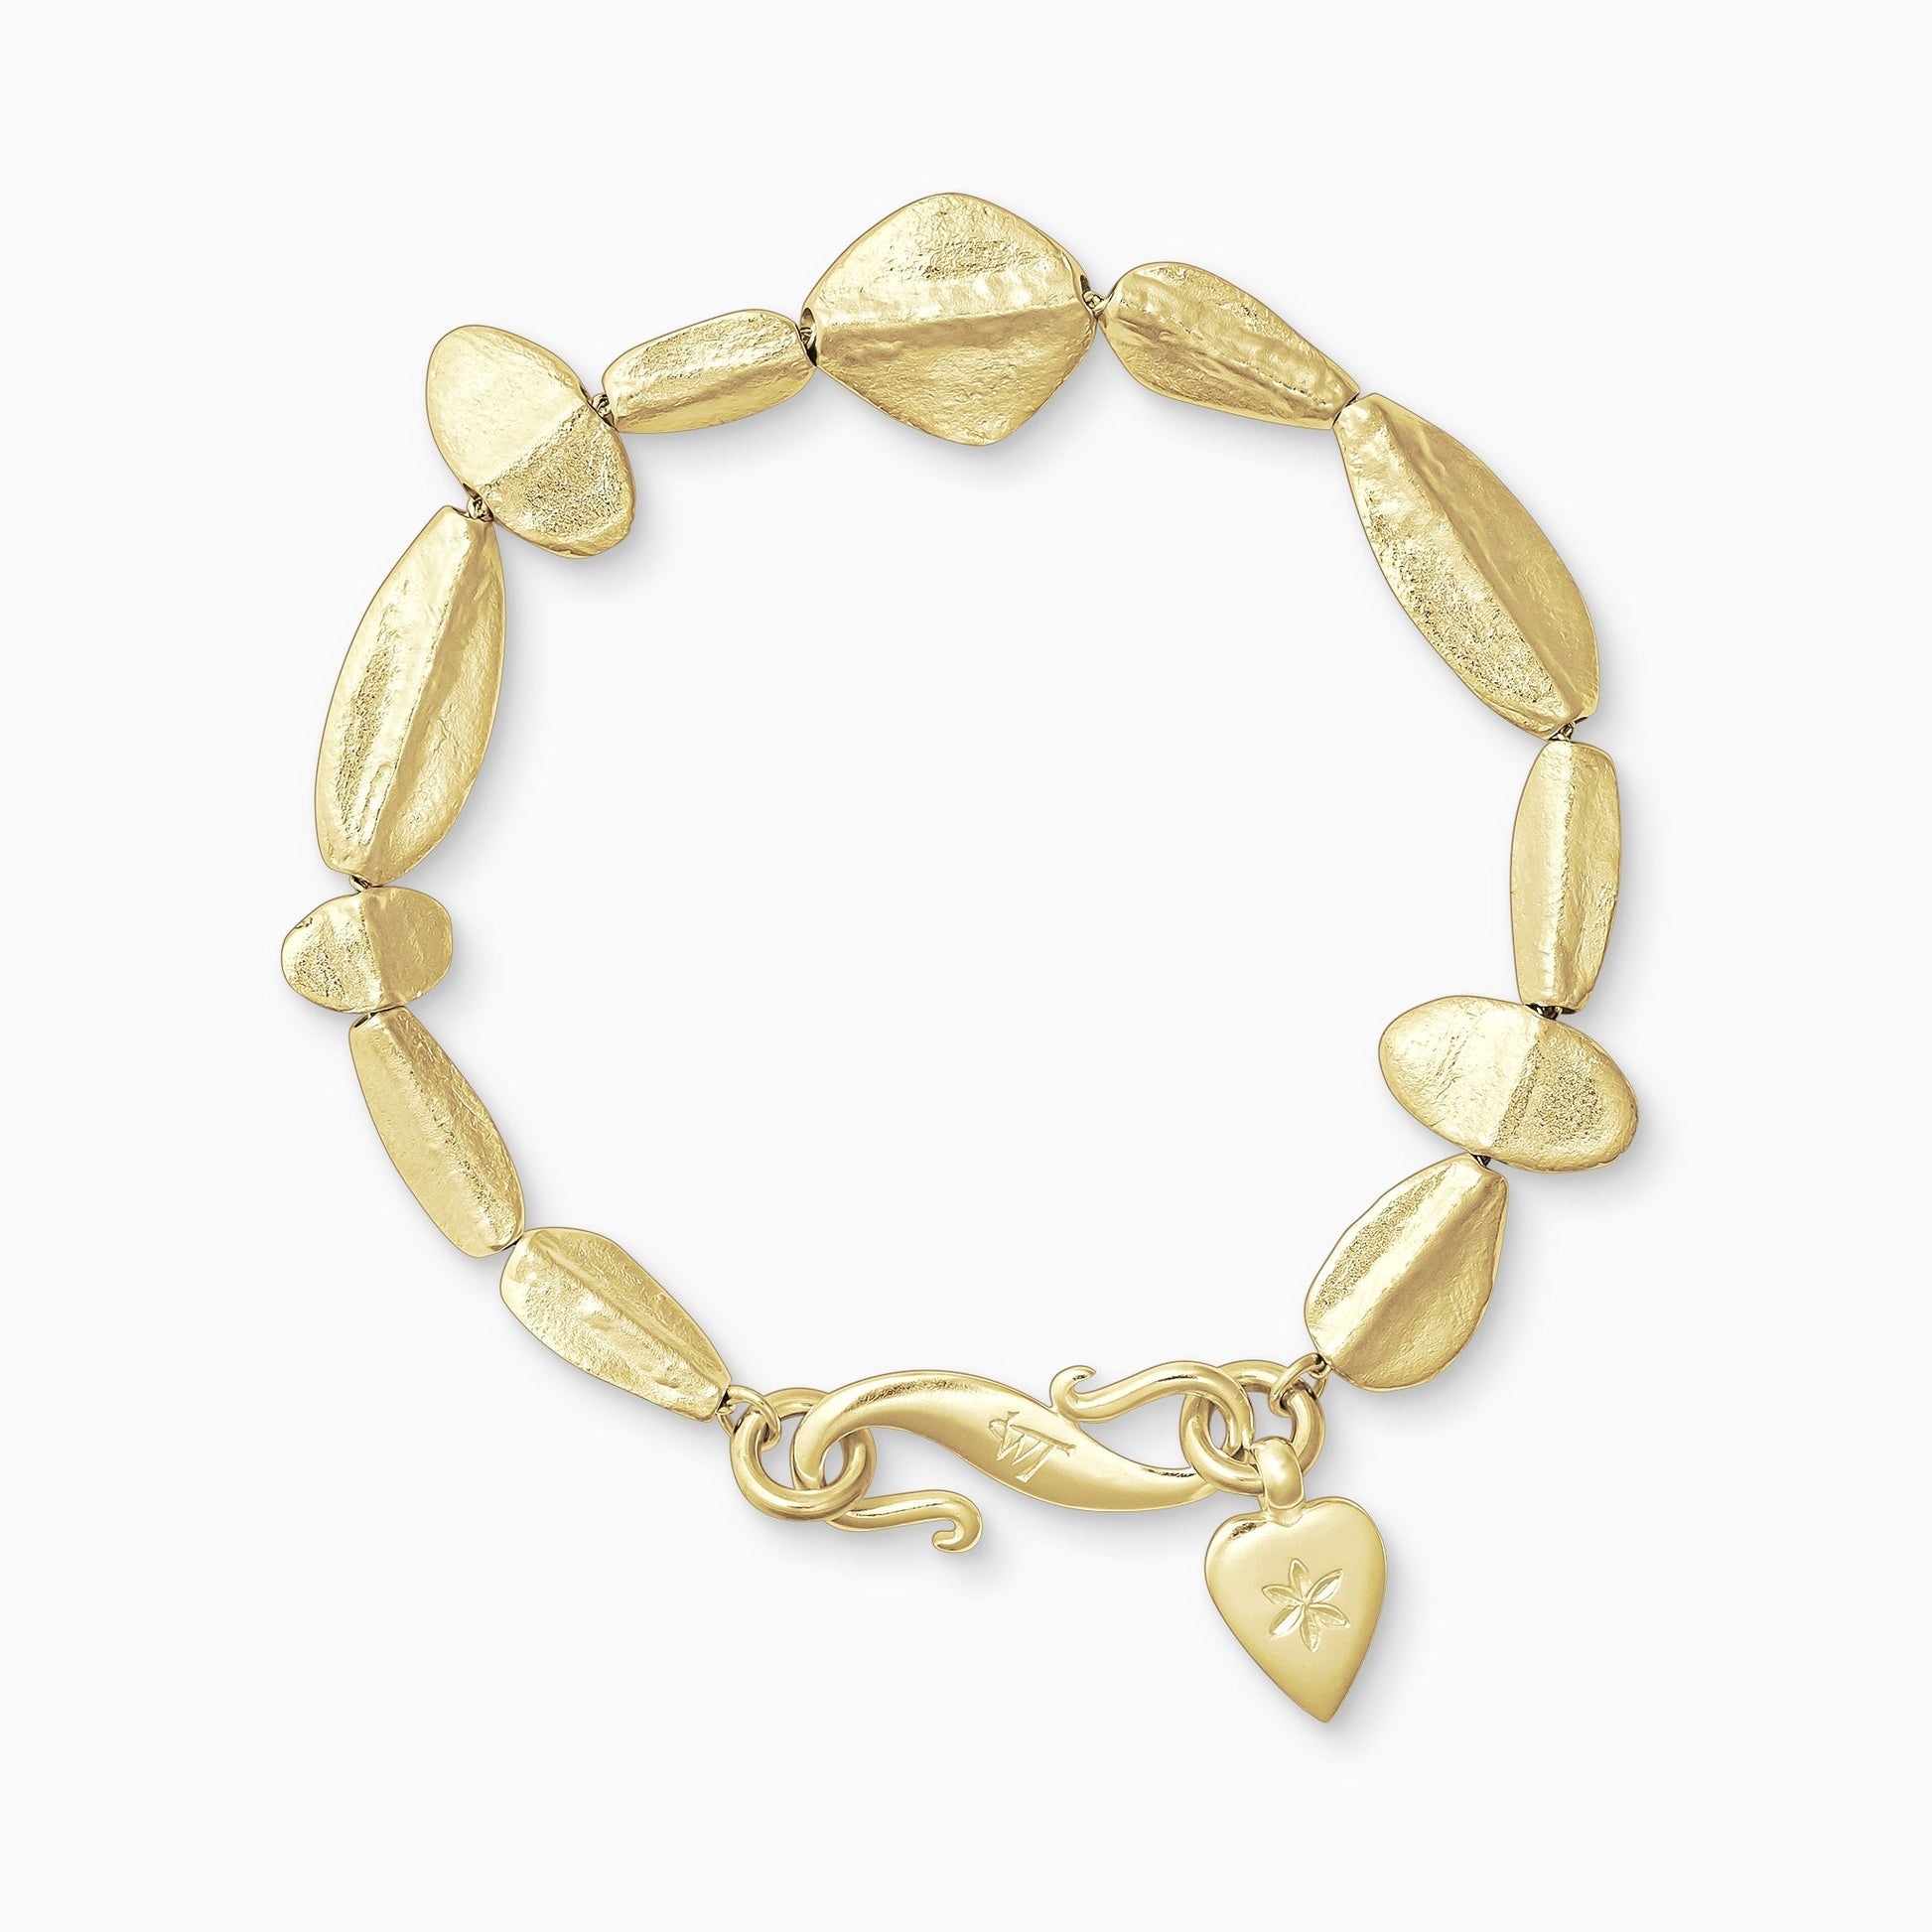 An 18ct Fairtrade yellow gold bracelet of handmade textured beads with a central ridge.  Finished with a smooth heart shaped charm engraved with a 6 petal flower and our signature ’S’ clasp. Bracelet length 210mm. Beads varying sizes from 11mm x 6mm to 35mm x 15mm.